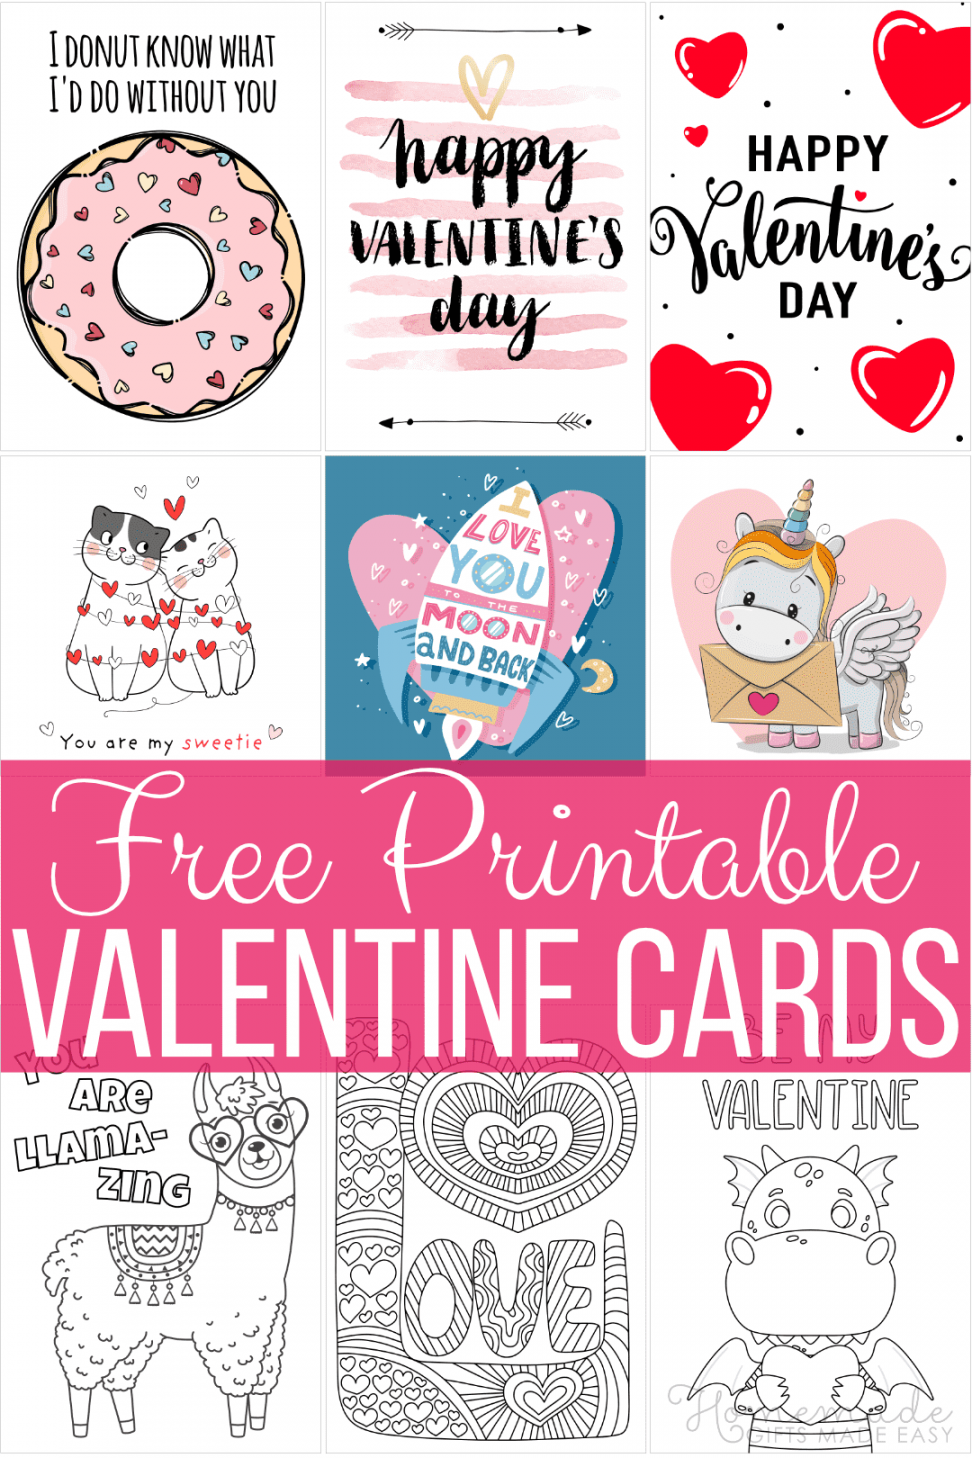 Printable Cards For Free - Printable -  Free Printable Valentine Cards for